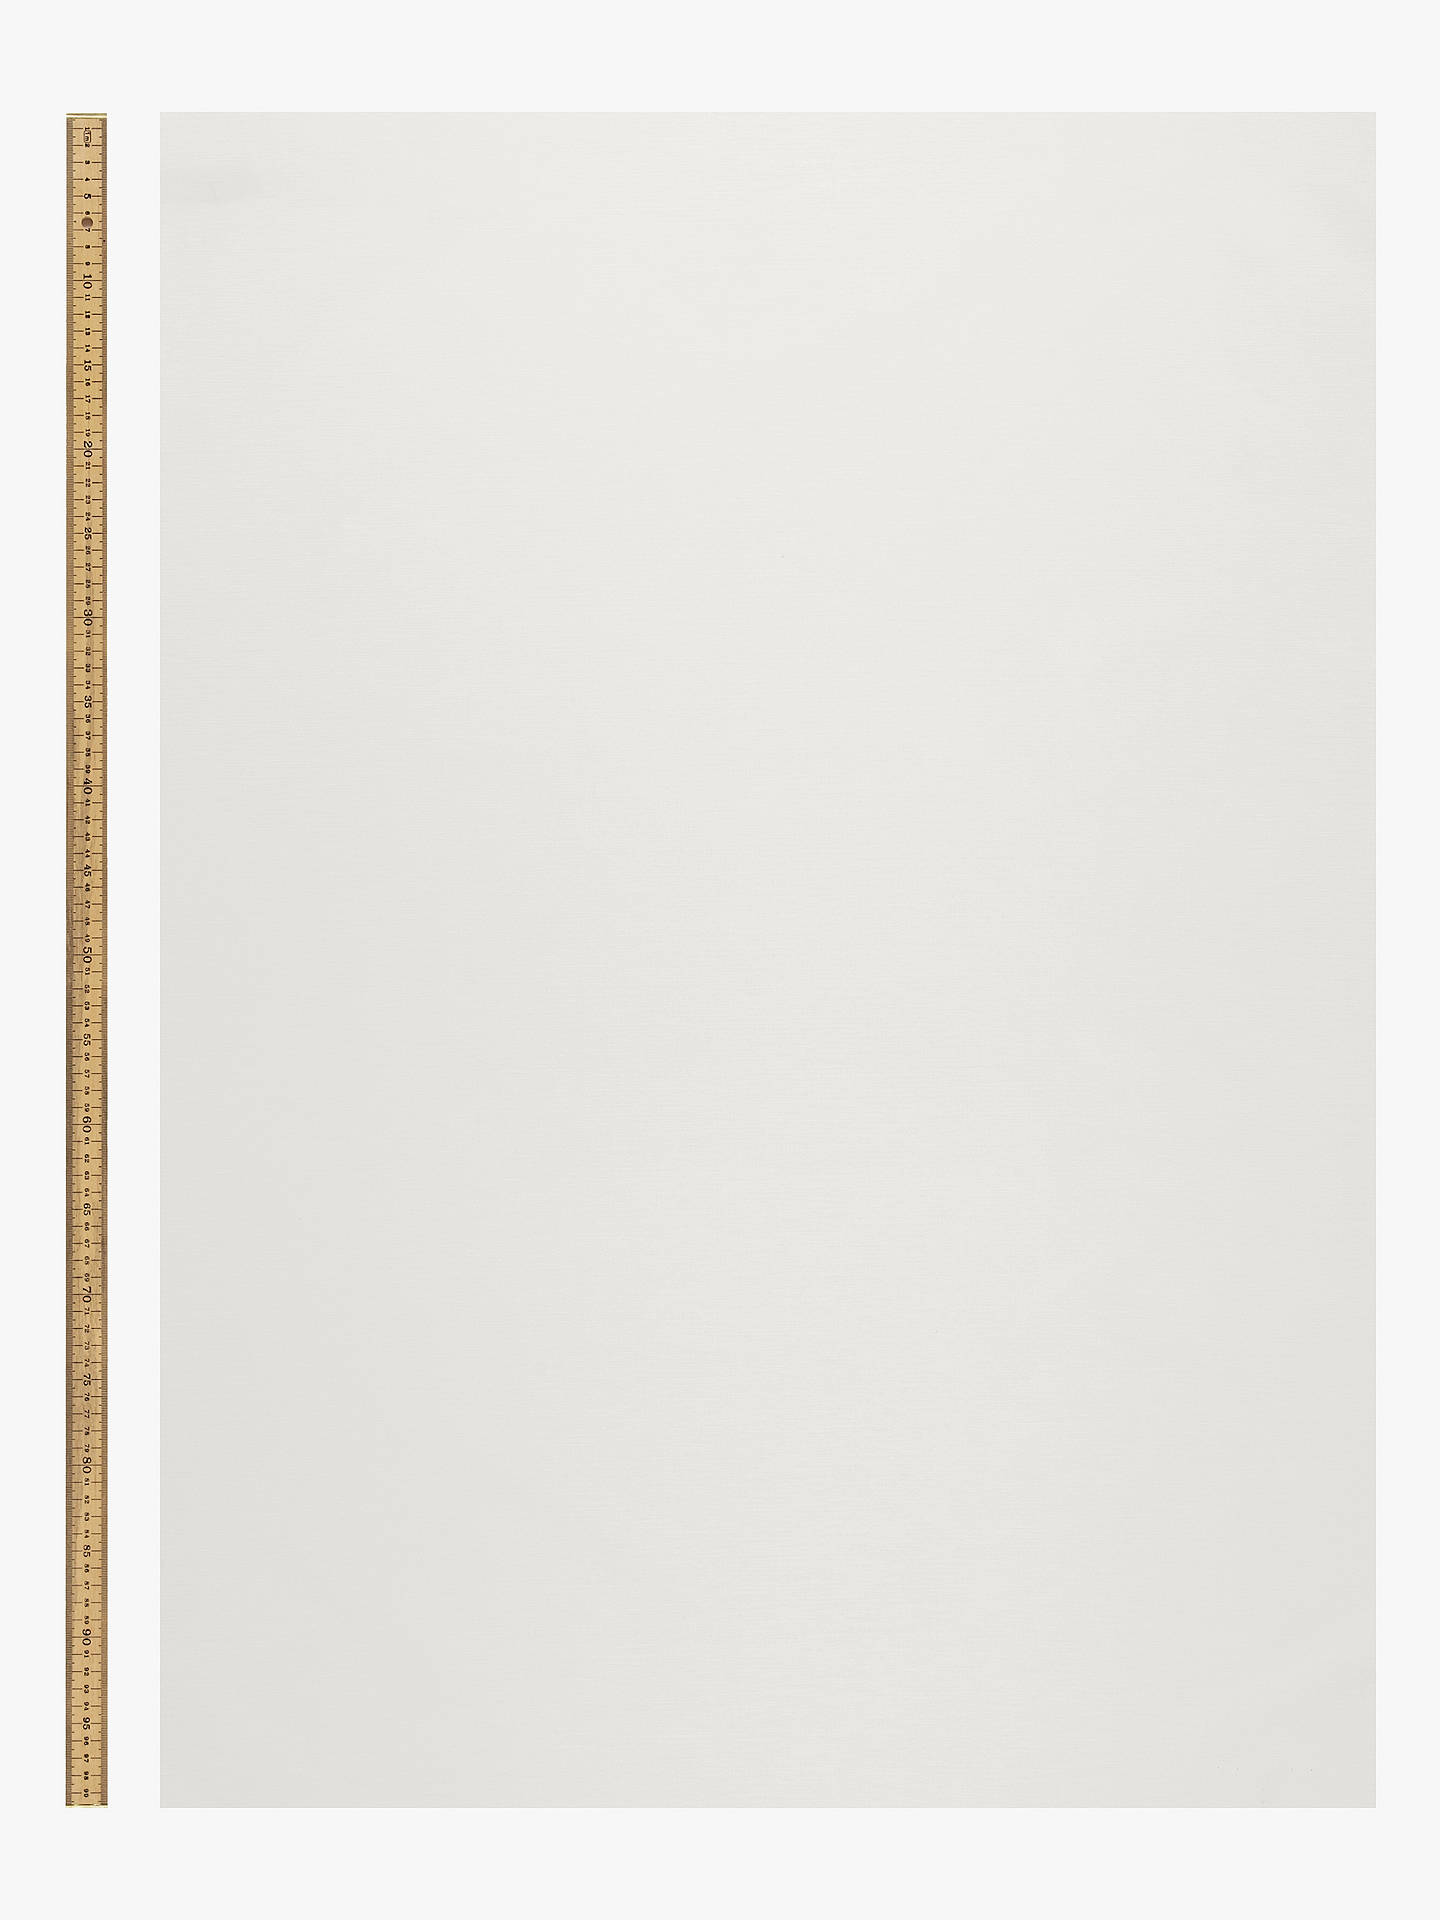 John Lewis Prato Made to Measure Blackout Roller Blind, Pearly White